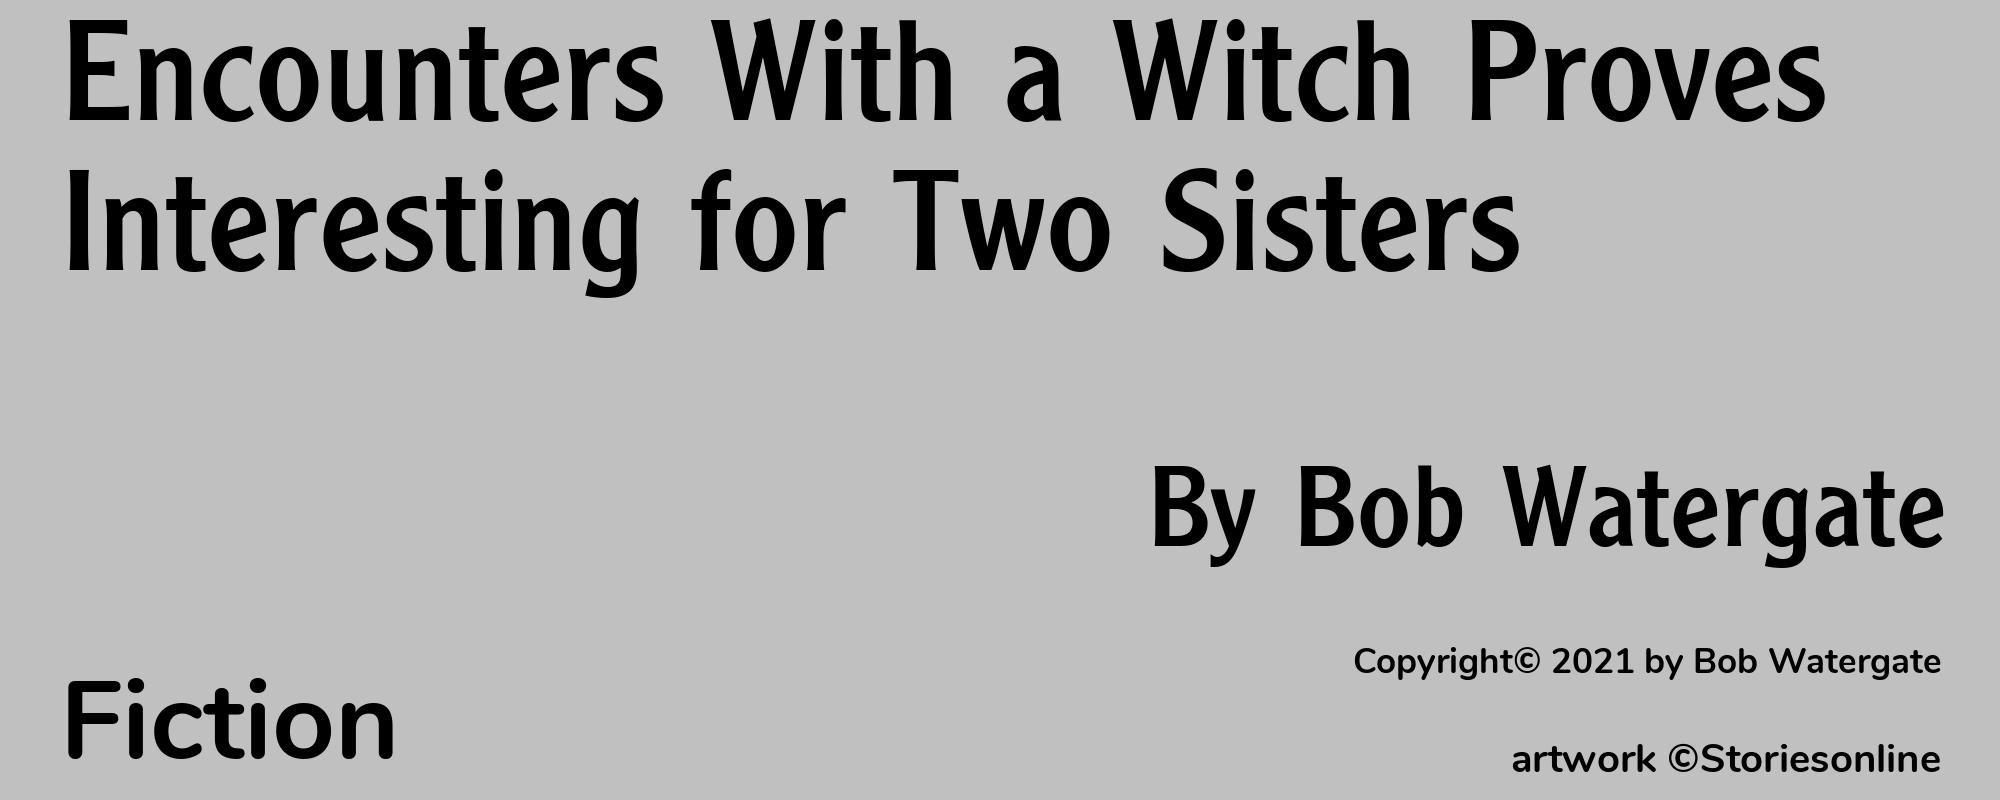 Encounters With a Witch Proves Interesting for Two Sisters - Cover